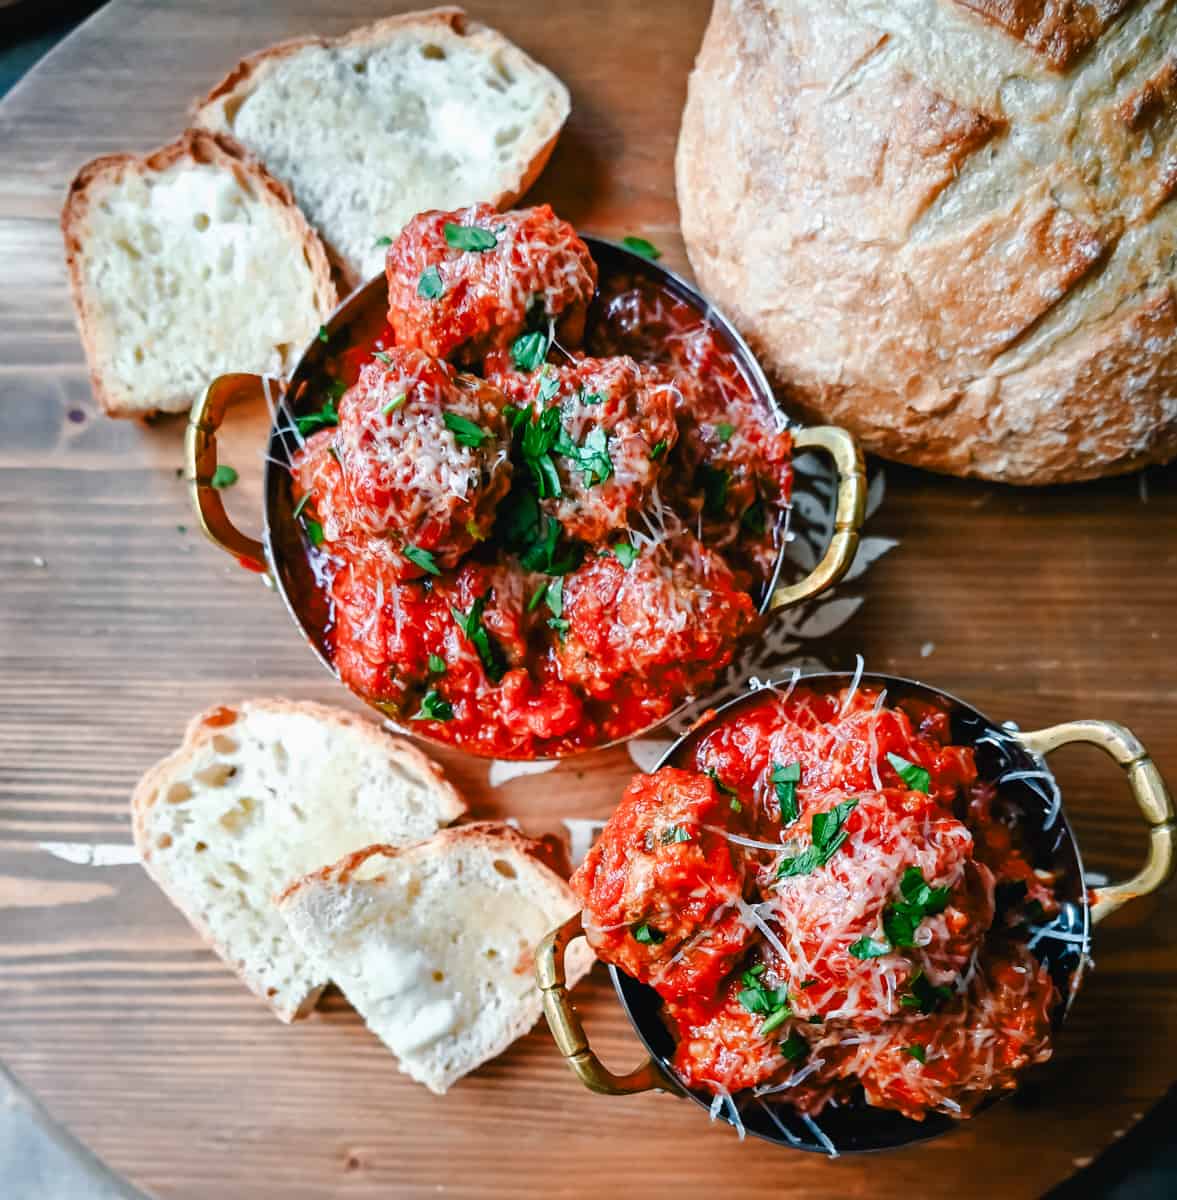 How to master the art of making easy homemade meatballs. This is the best homemade meatball recipe made with fresh ingredients! I will share all of my secrets to making the most perfect meatballs.